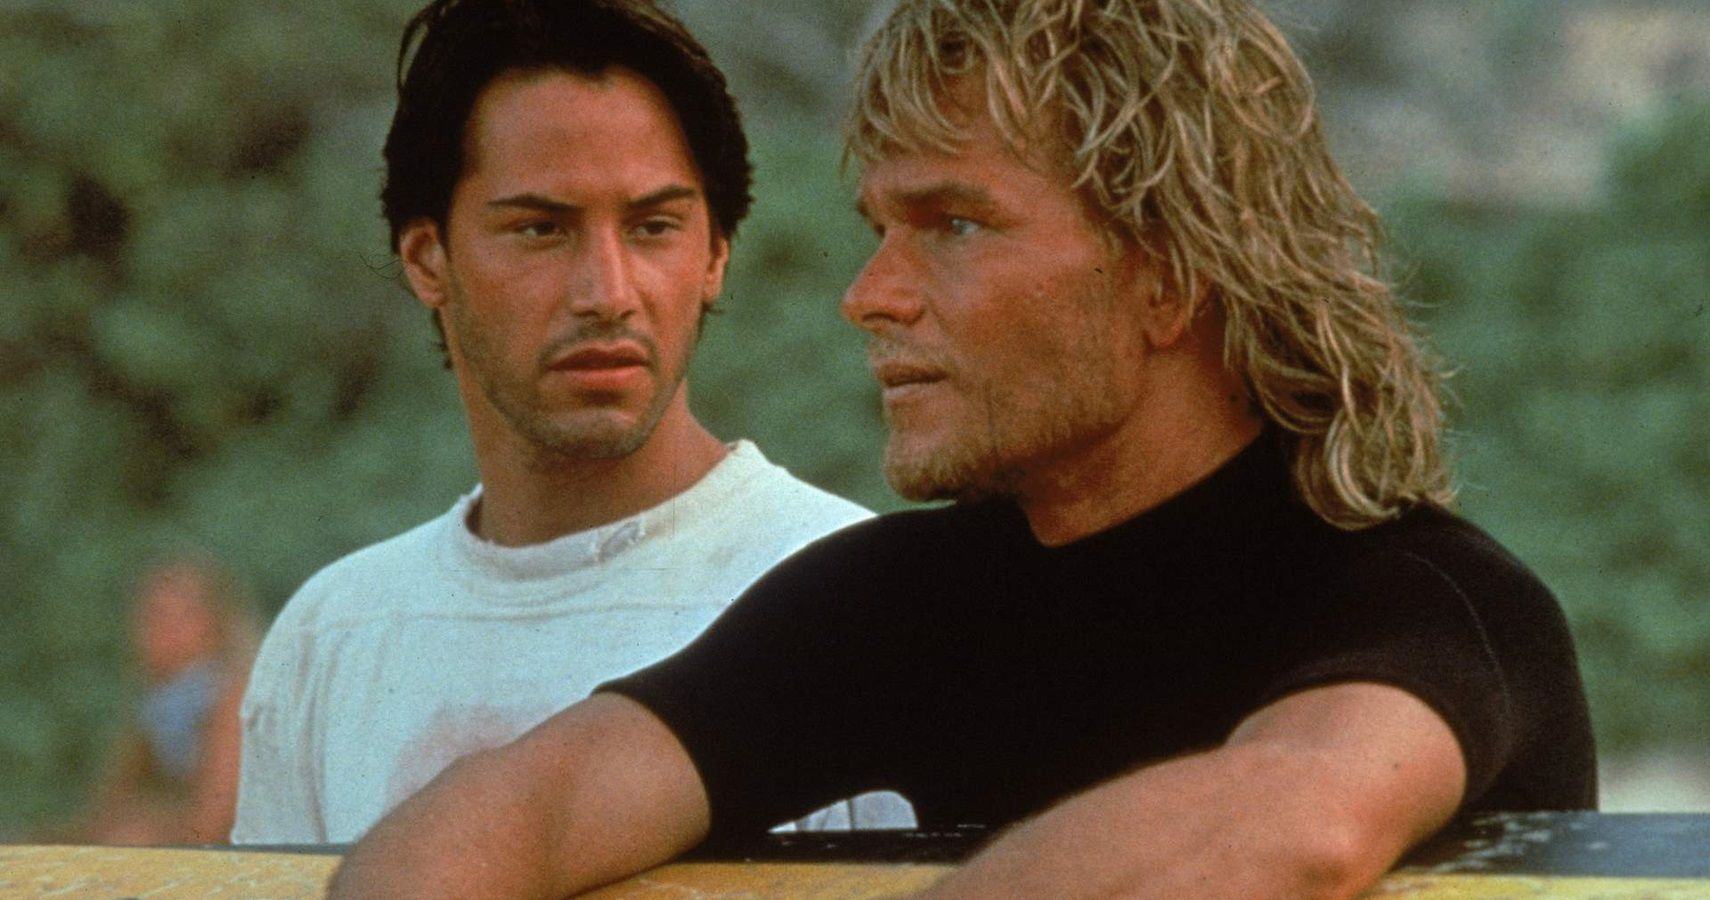 Utah, Get Me Two!: 10 Behind-The-Scenes Facts About Point Break (1991)